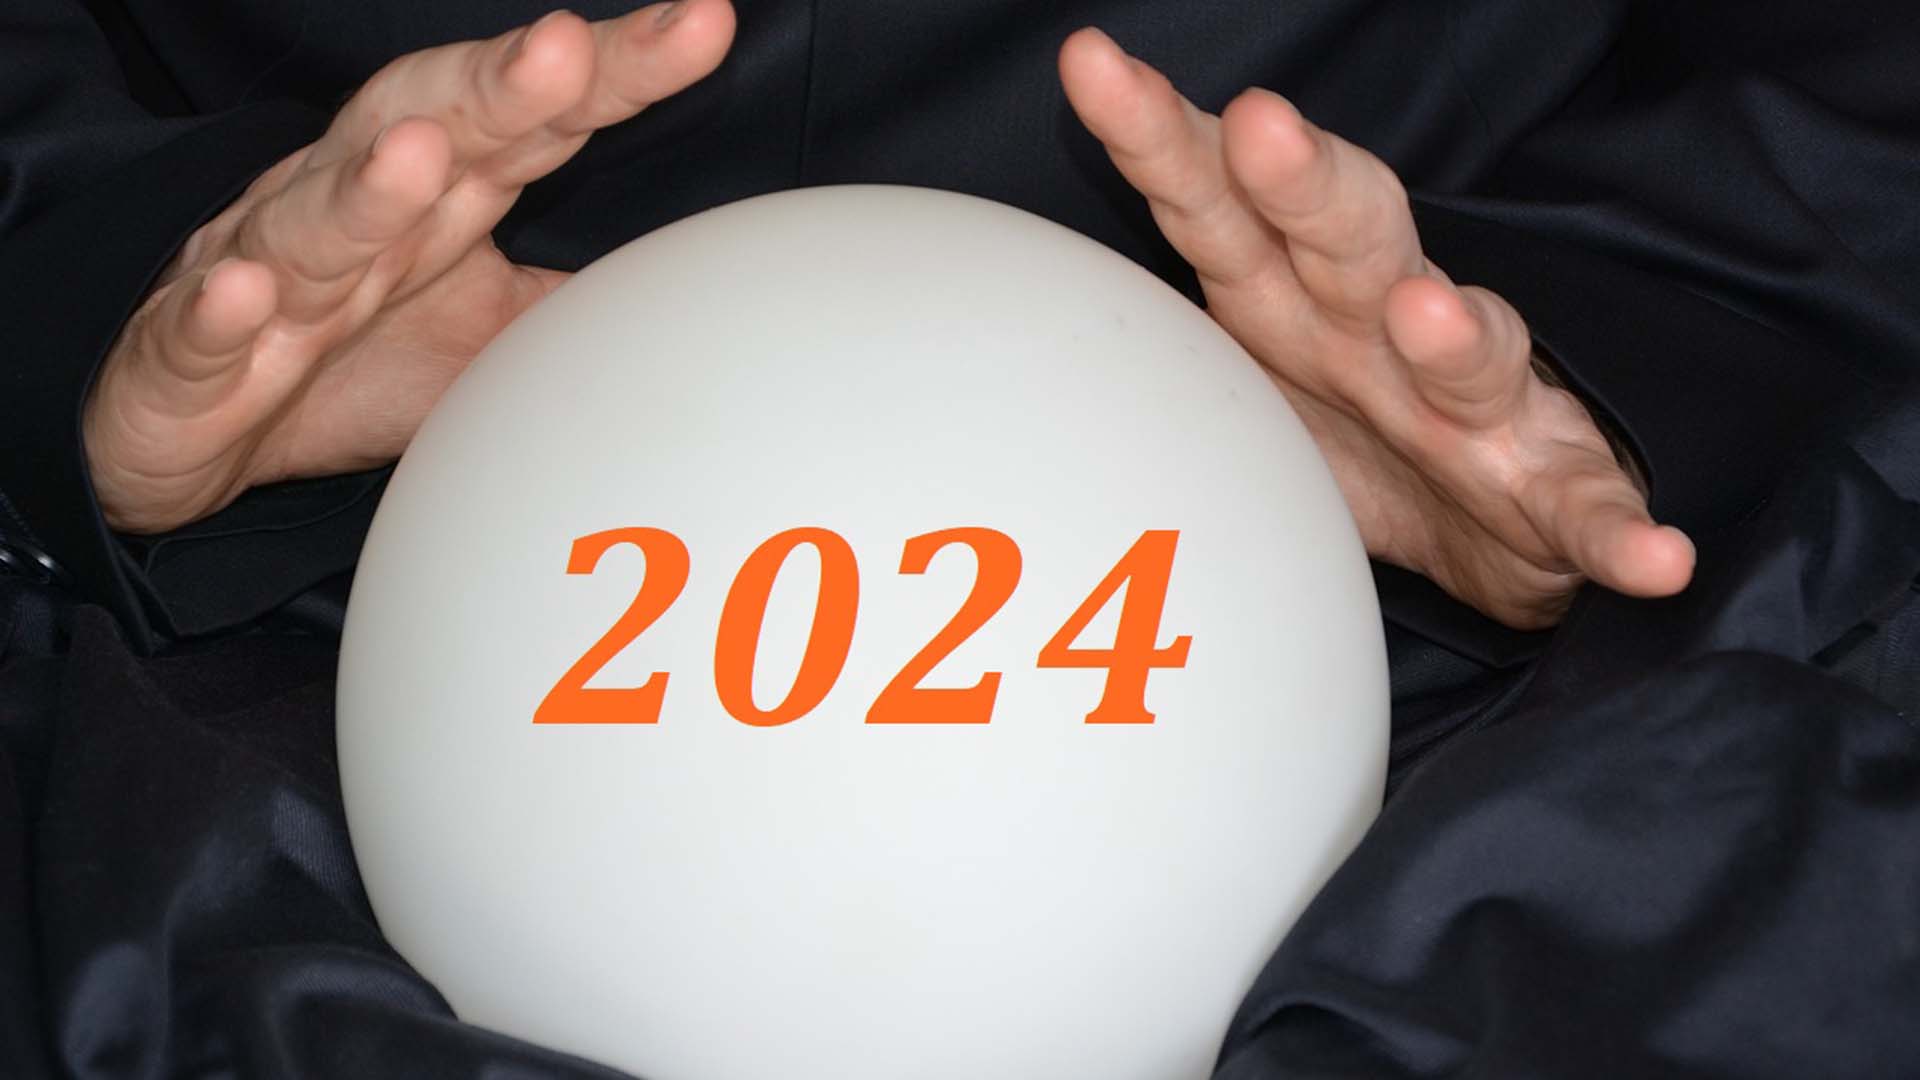 3 critical areas of predictions for 2024